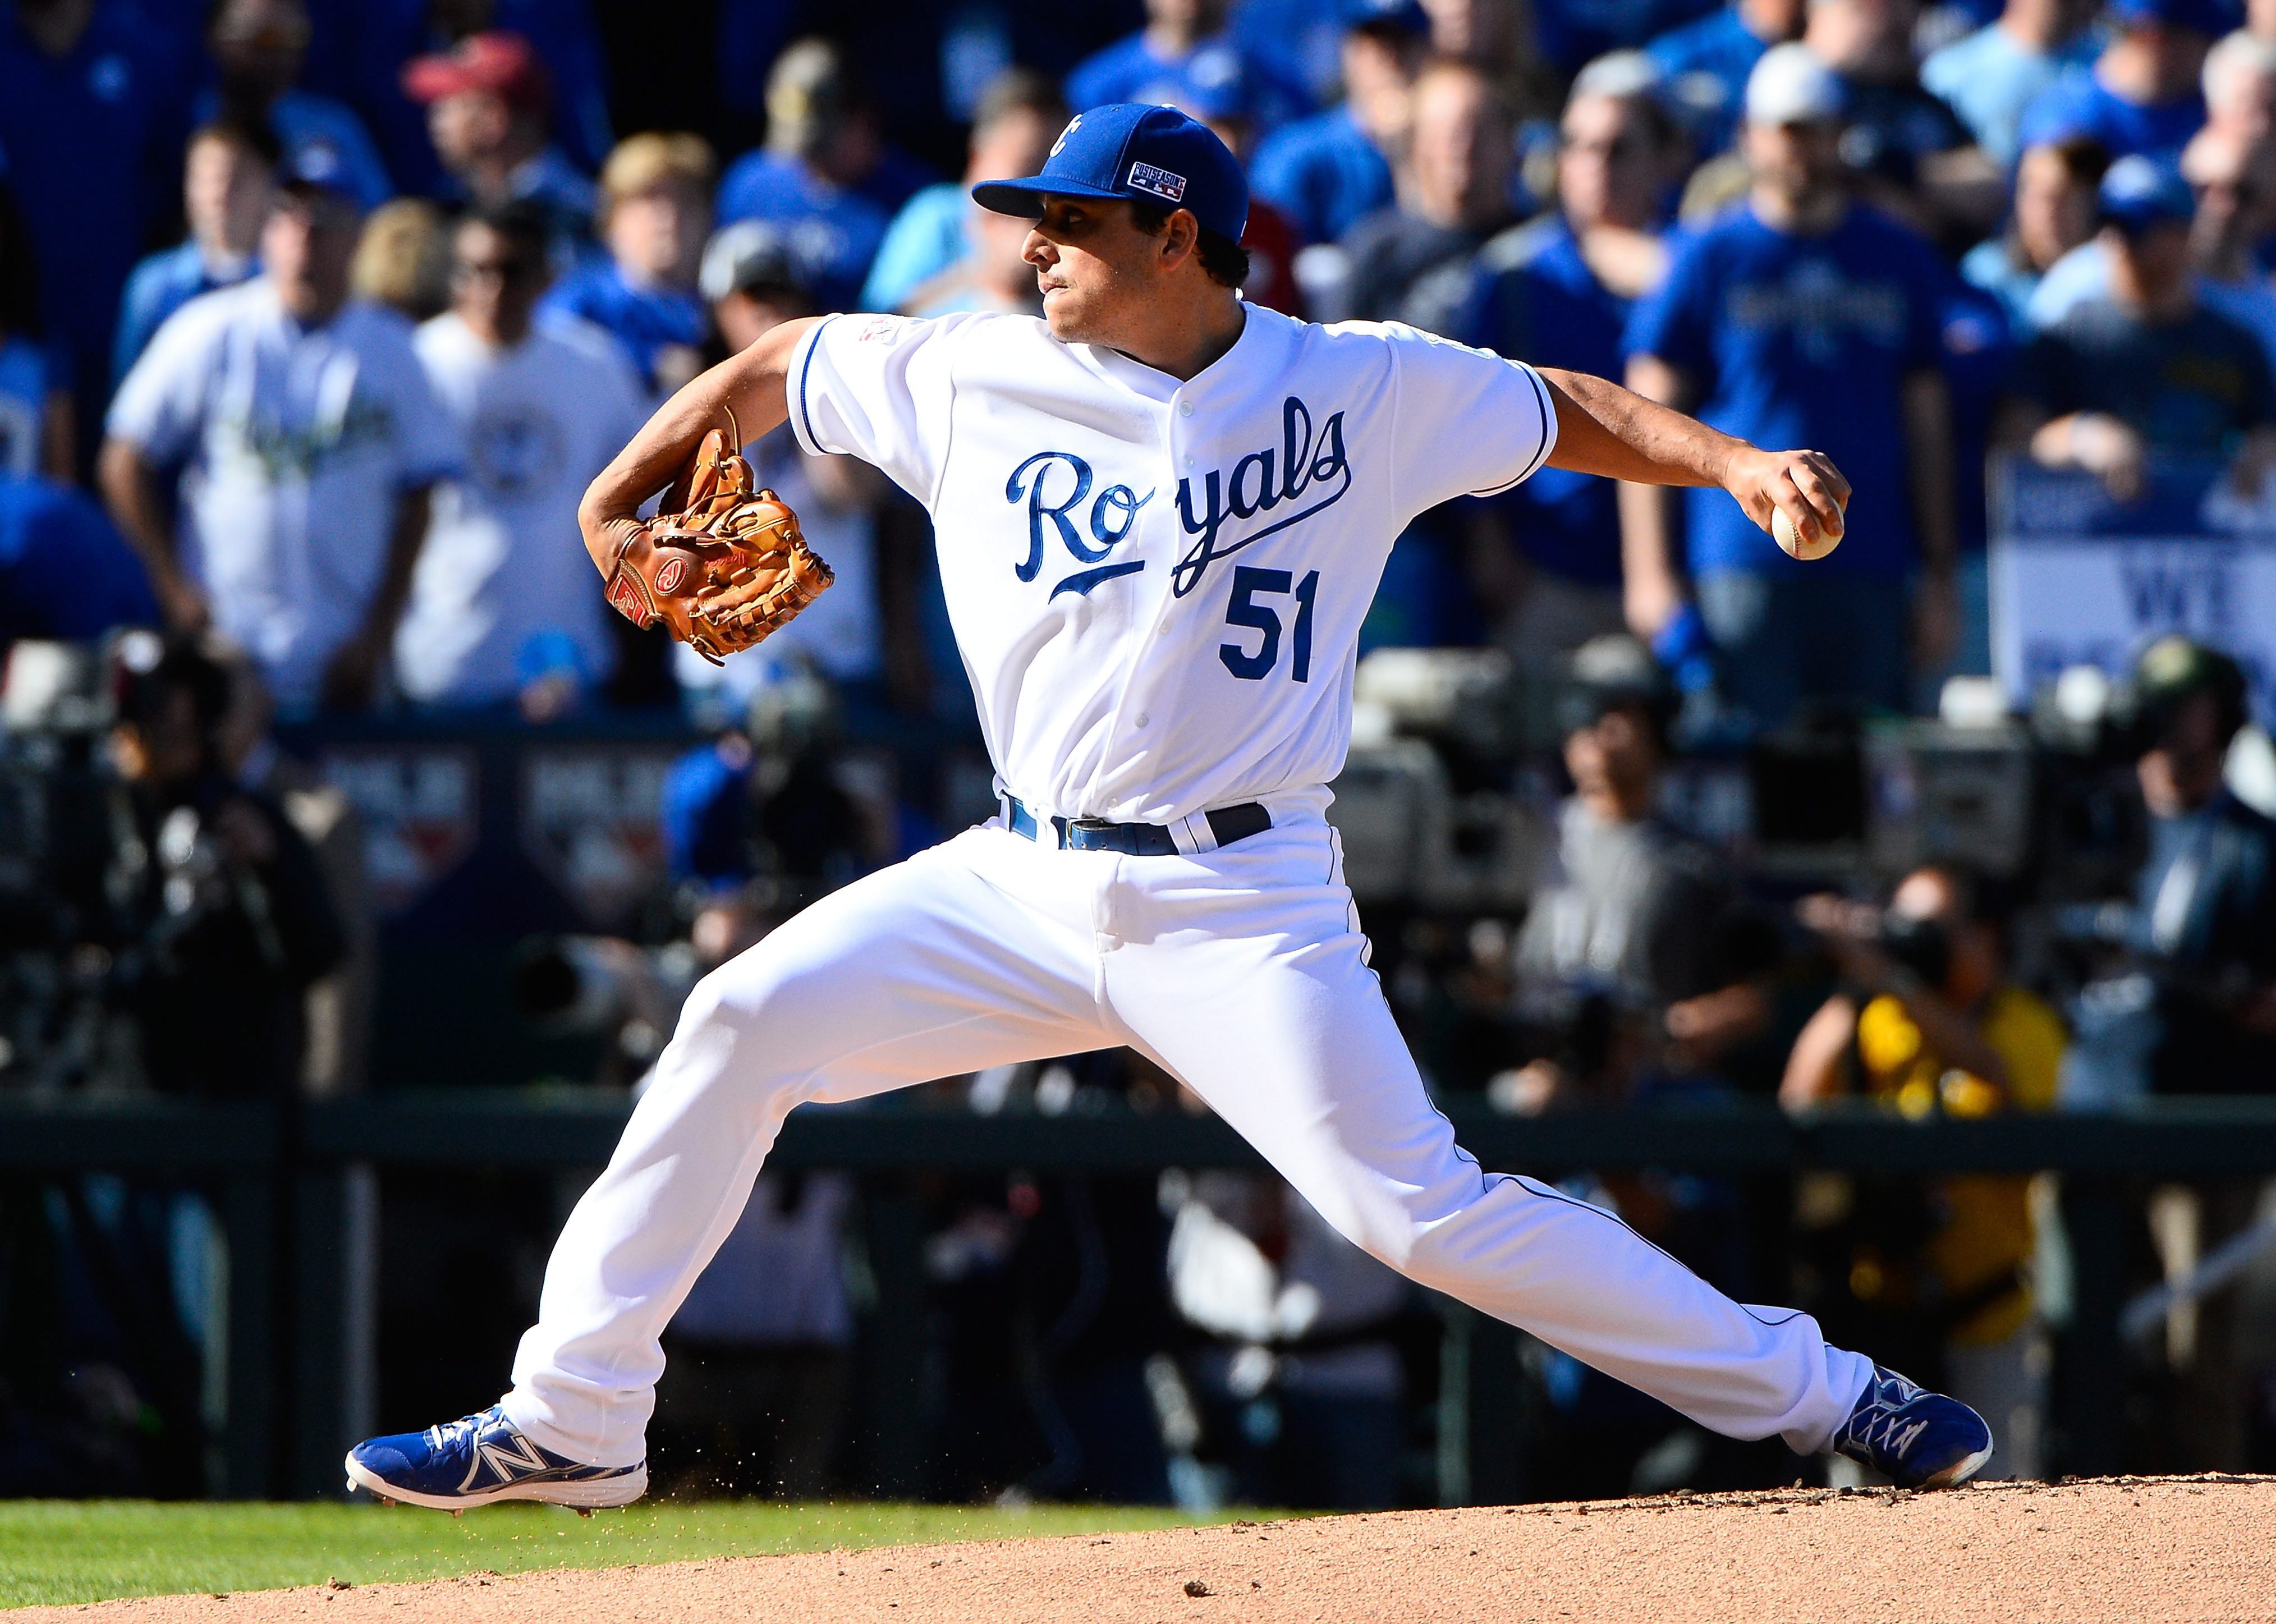 Kansas City Royals starting pitcher Jason Vargas pitches during the first inning against the Baltimore Orioles in Game Four of the American League Championship Series at Kaufman Stadium in Kansas City, Missouri on Oct. 15, 2014.